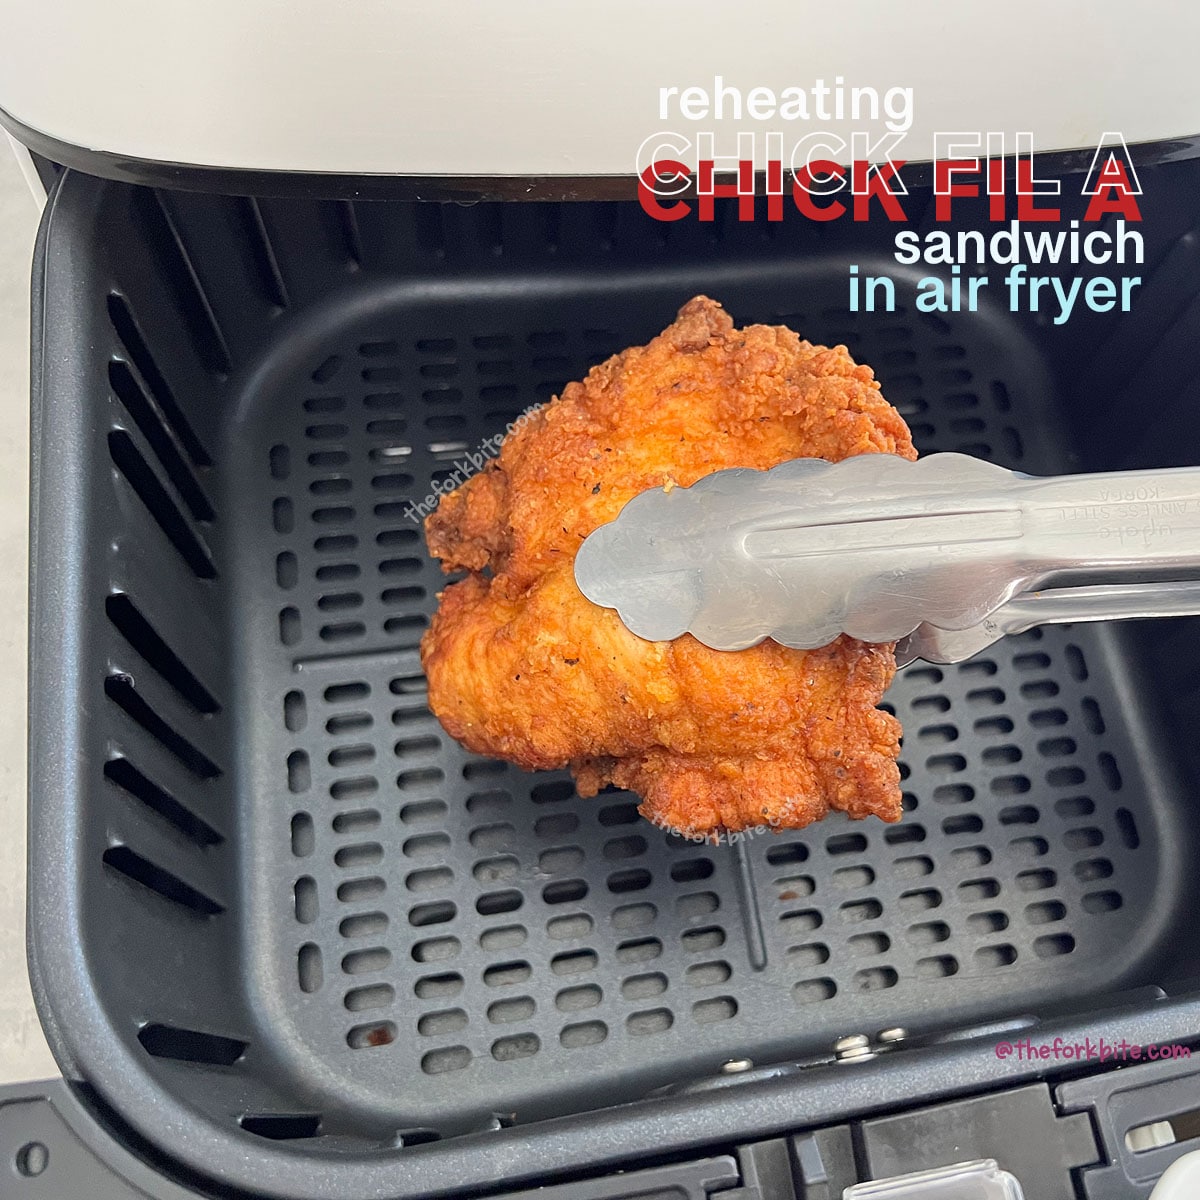 How to Reheat Chick Fil a Sandwich in Air Fryer 